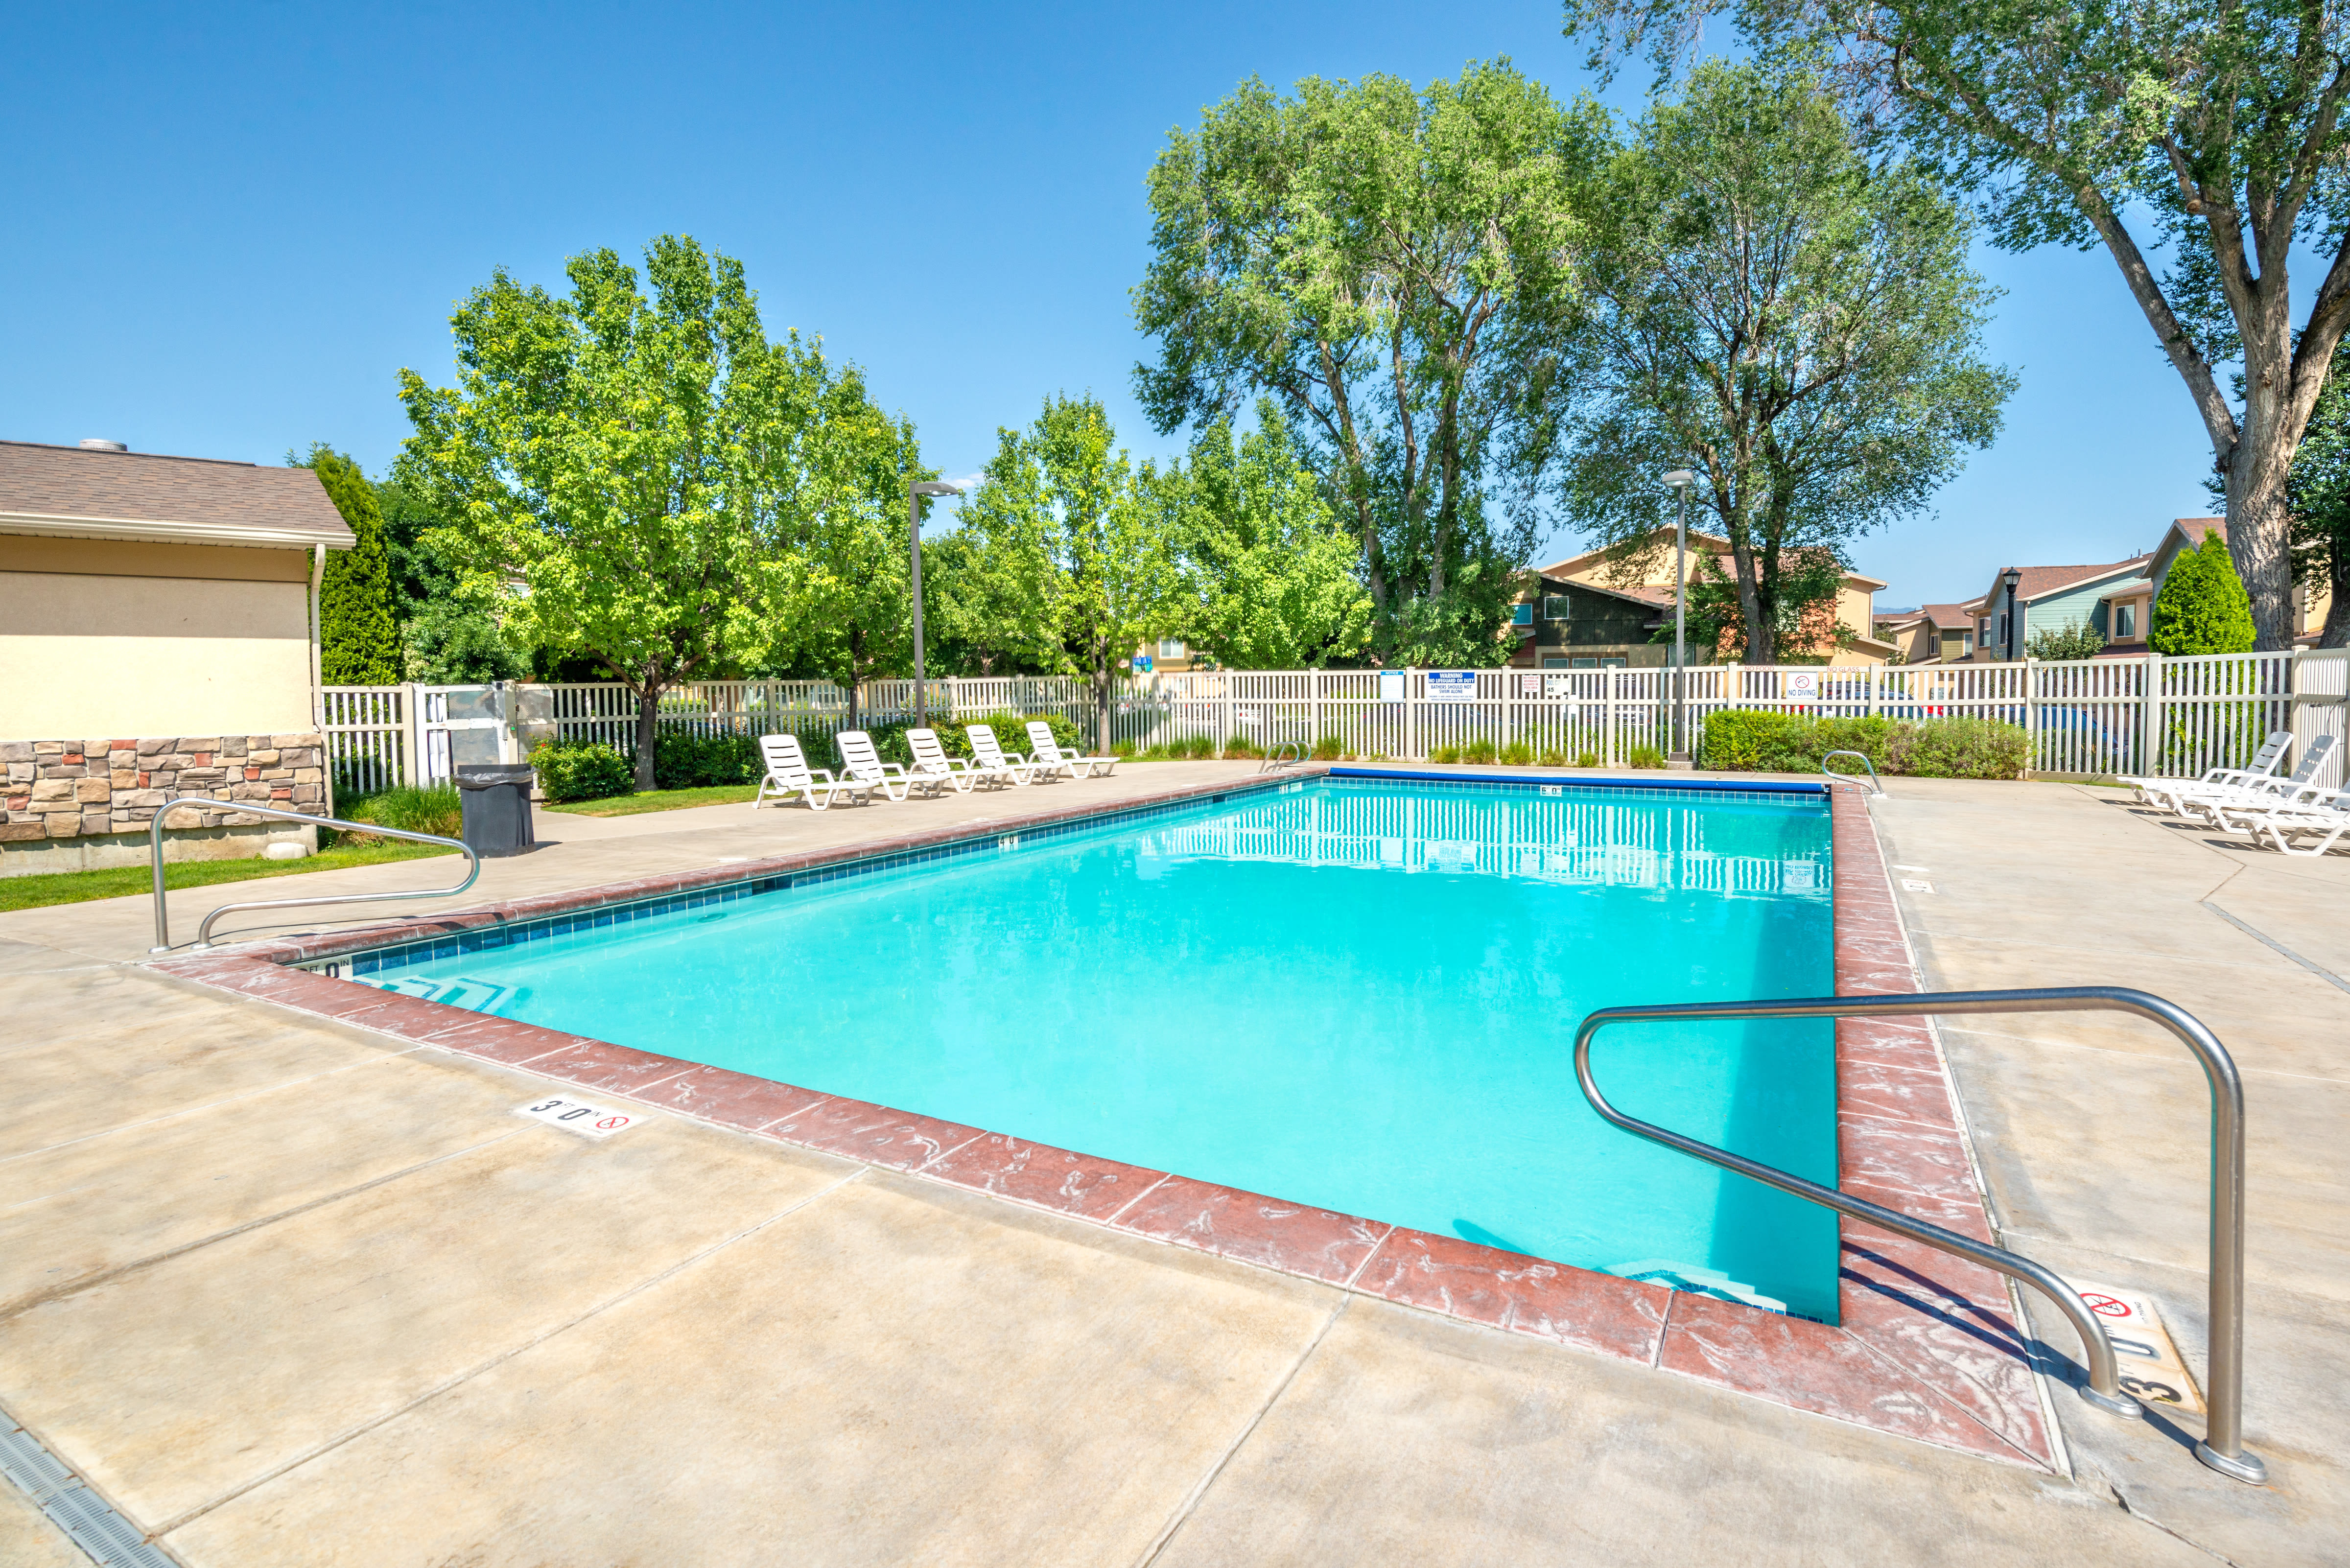 Community pool with mature trees in the background at Olympus at the District in South Jordan, Utah